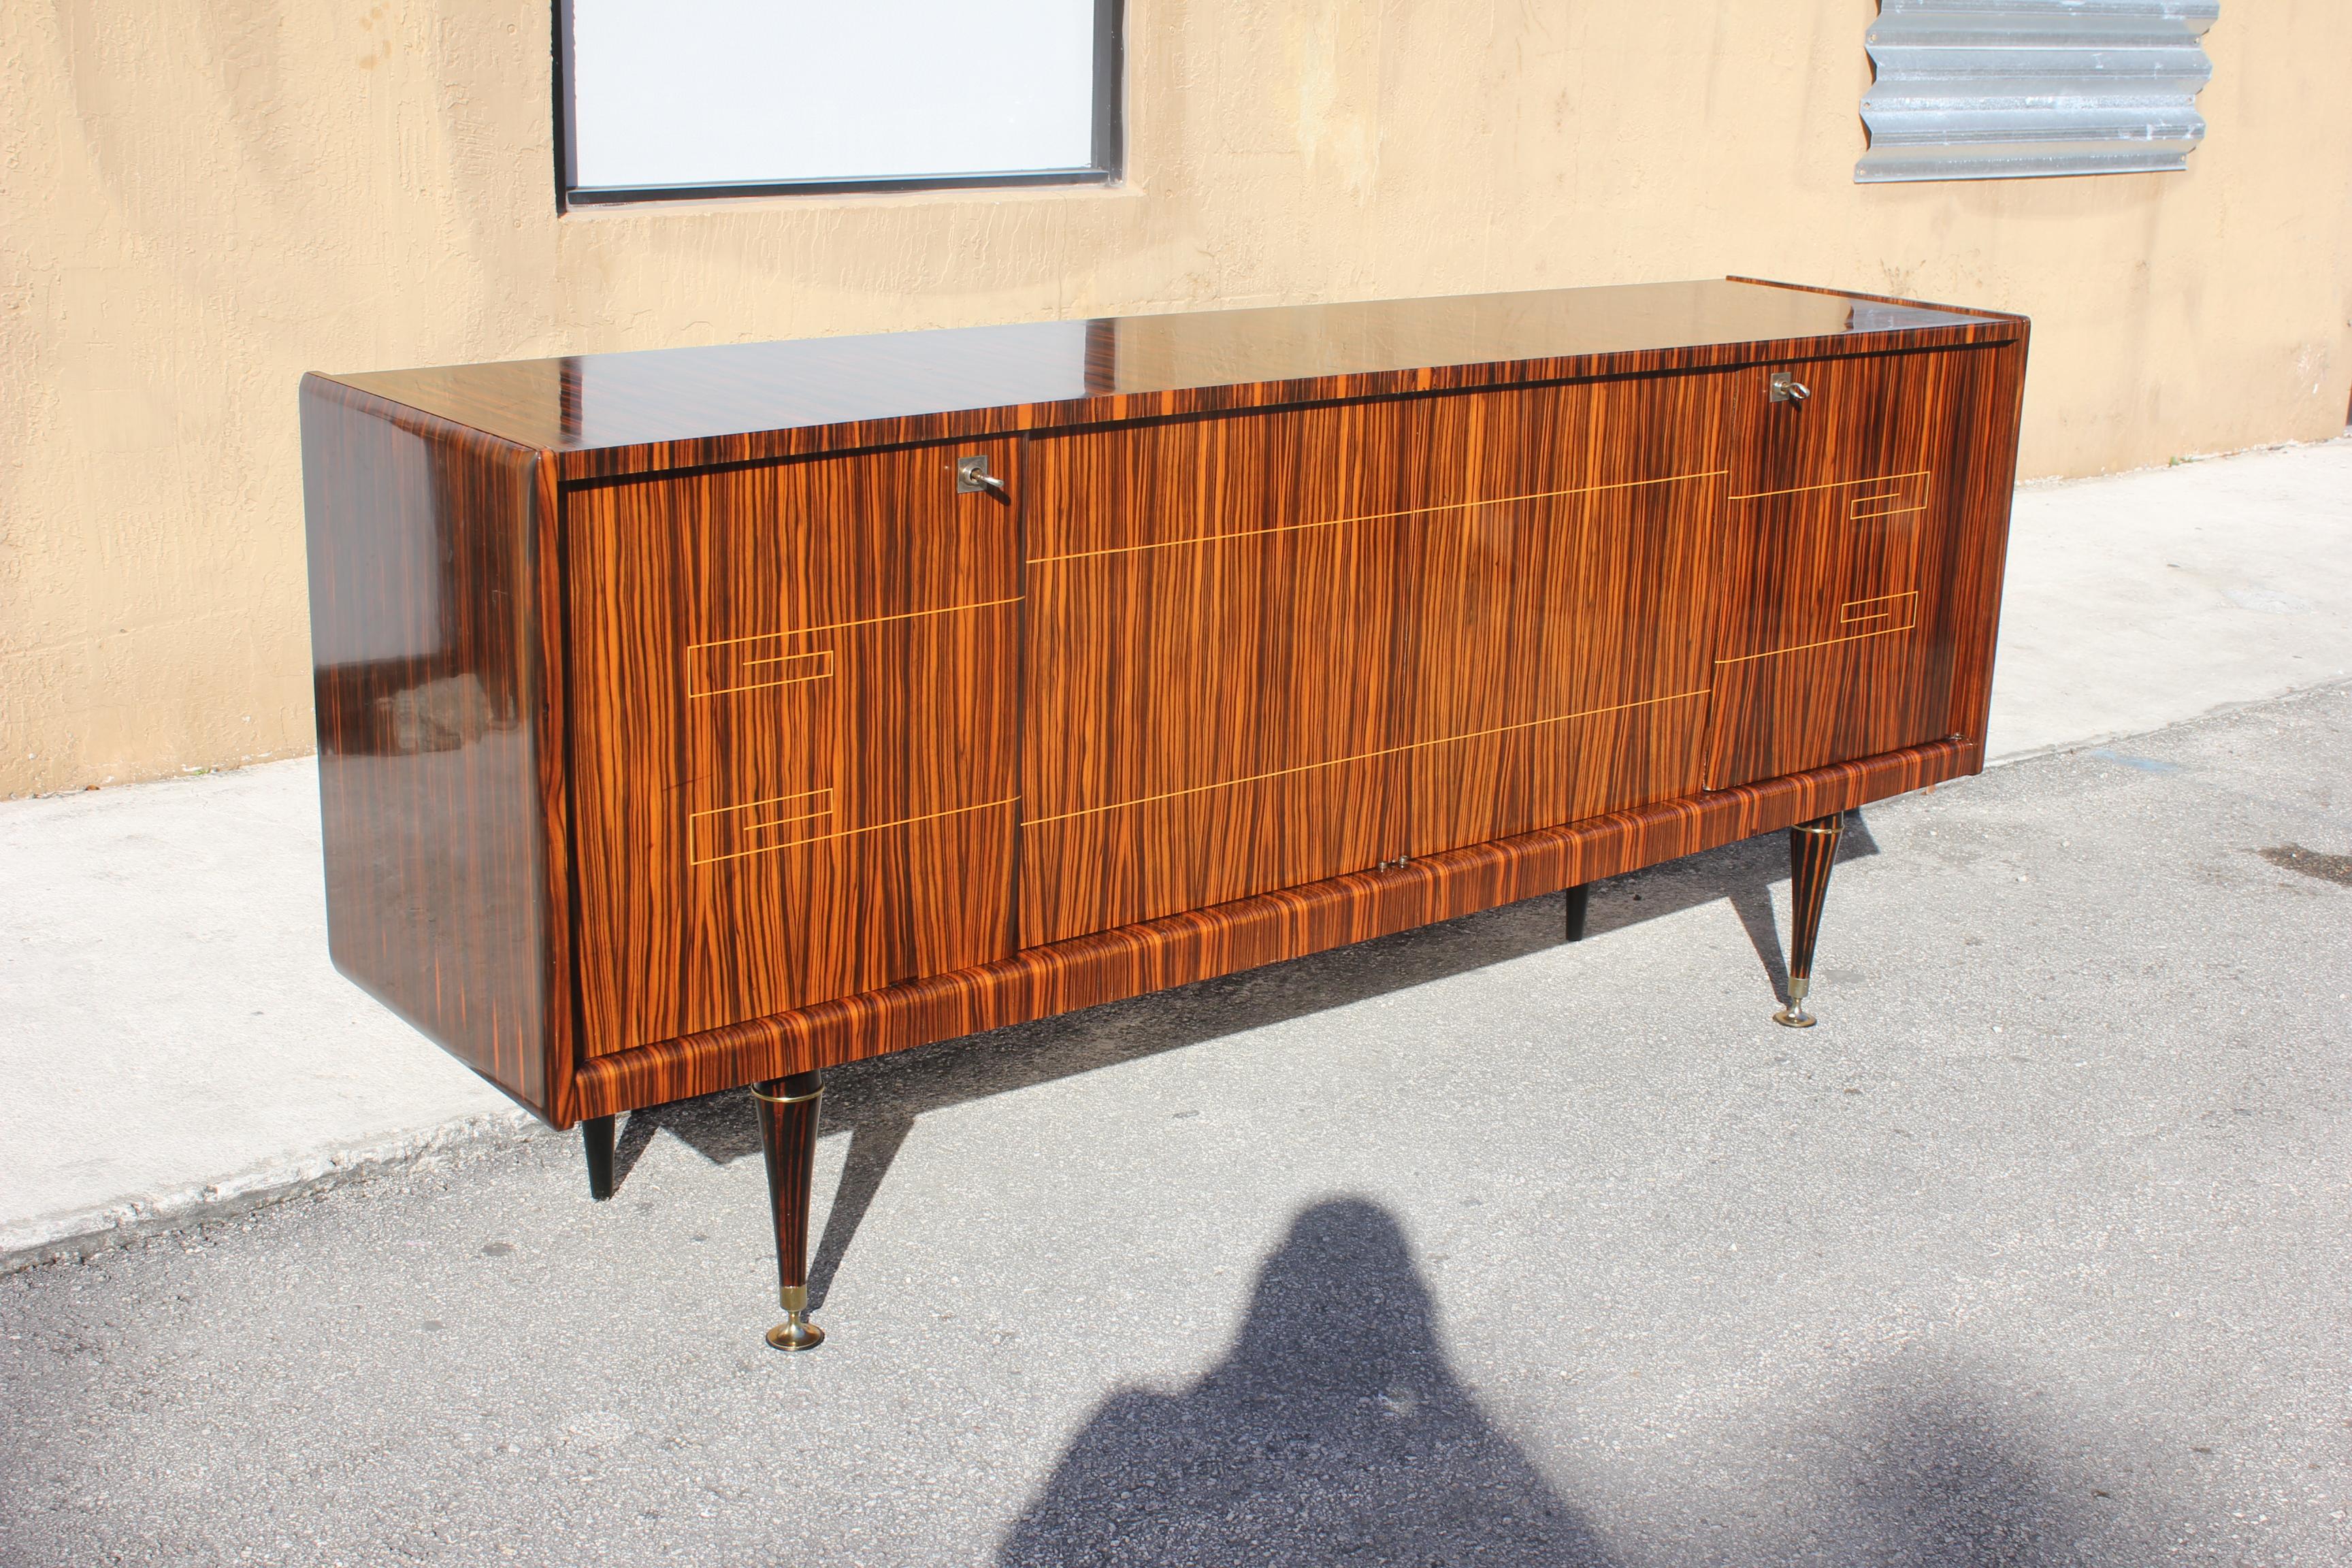 French Art Deco Style exotic Macassar ebony sideboard / buffet/bar, circa 1940s. The sideboard are in very good condition, with 4 shelves adjustable, and bar section, you can remove all the shelves if you need more space, beautiful bronze hardware